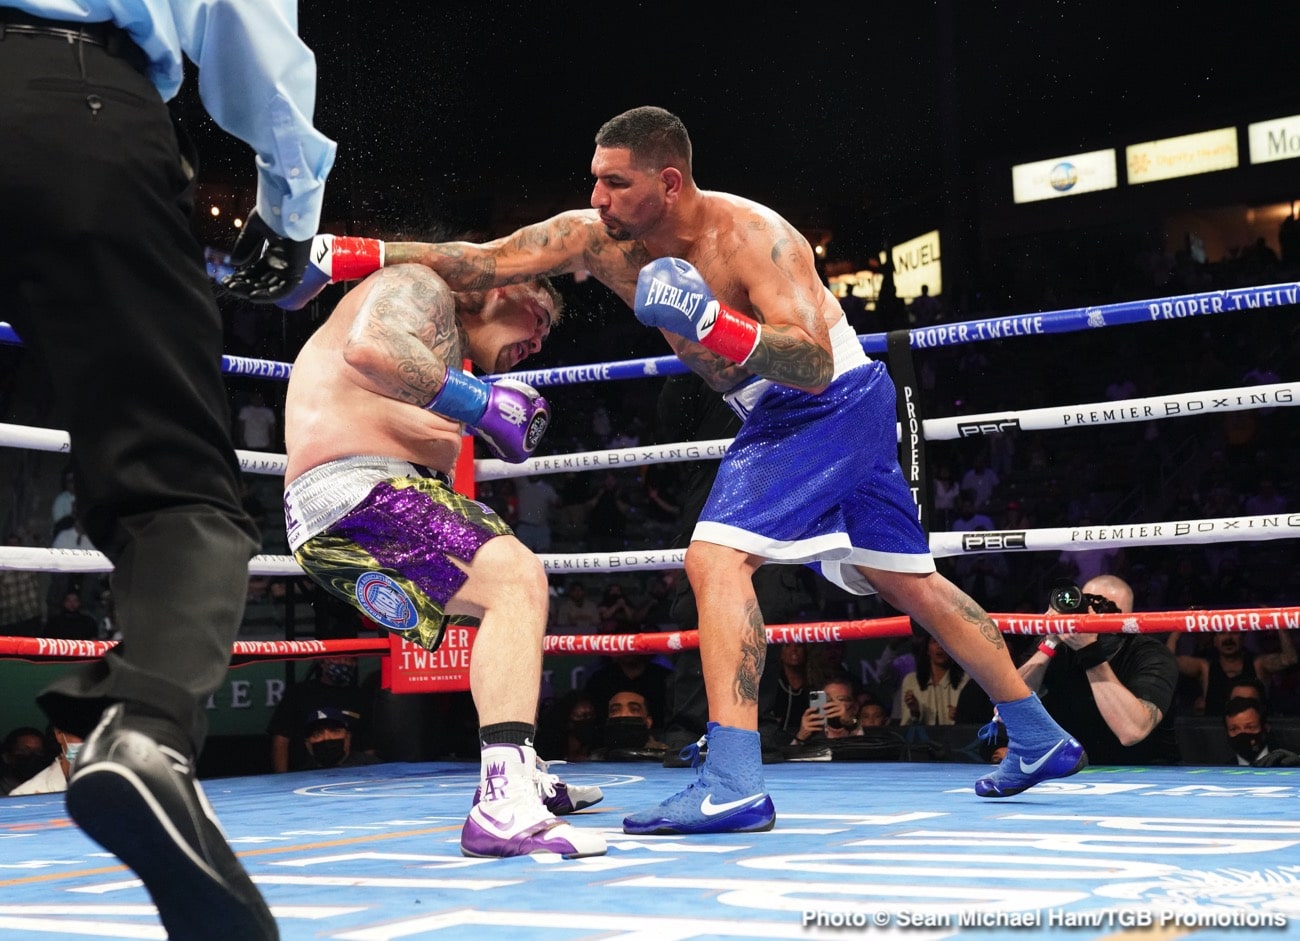 Dillian Whyte, Chris Arreola boxing photo and news image